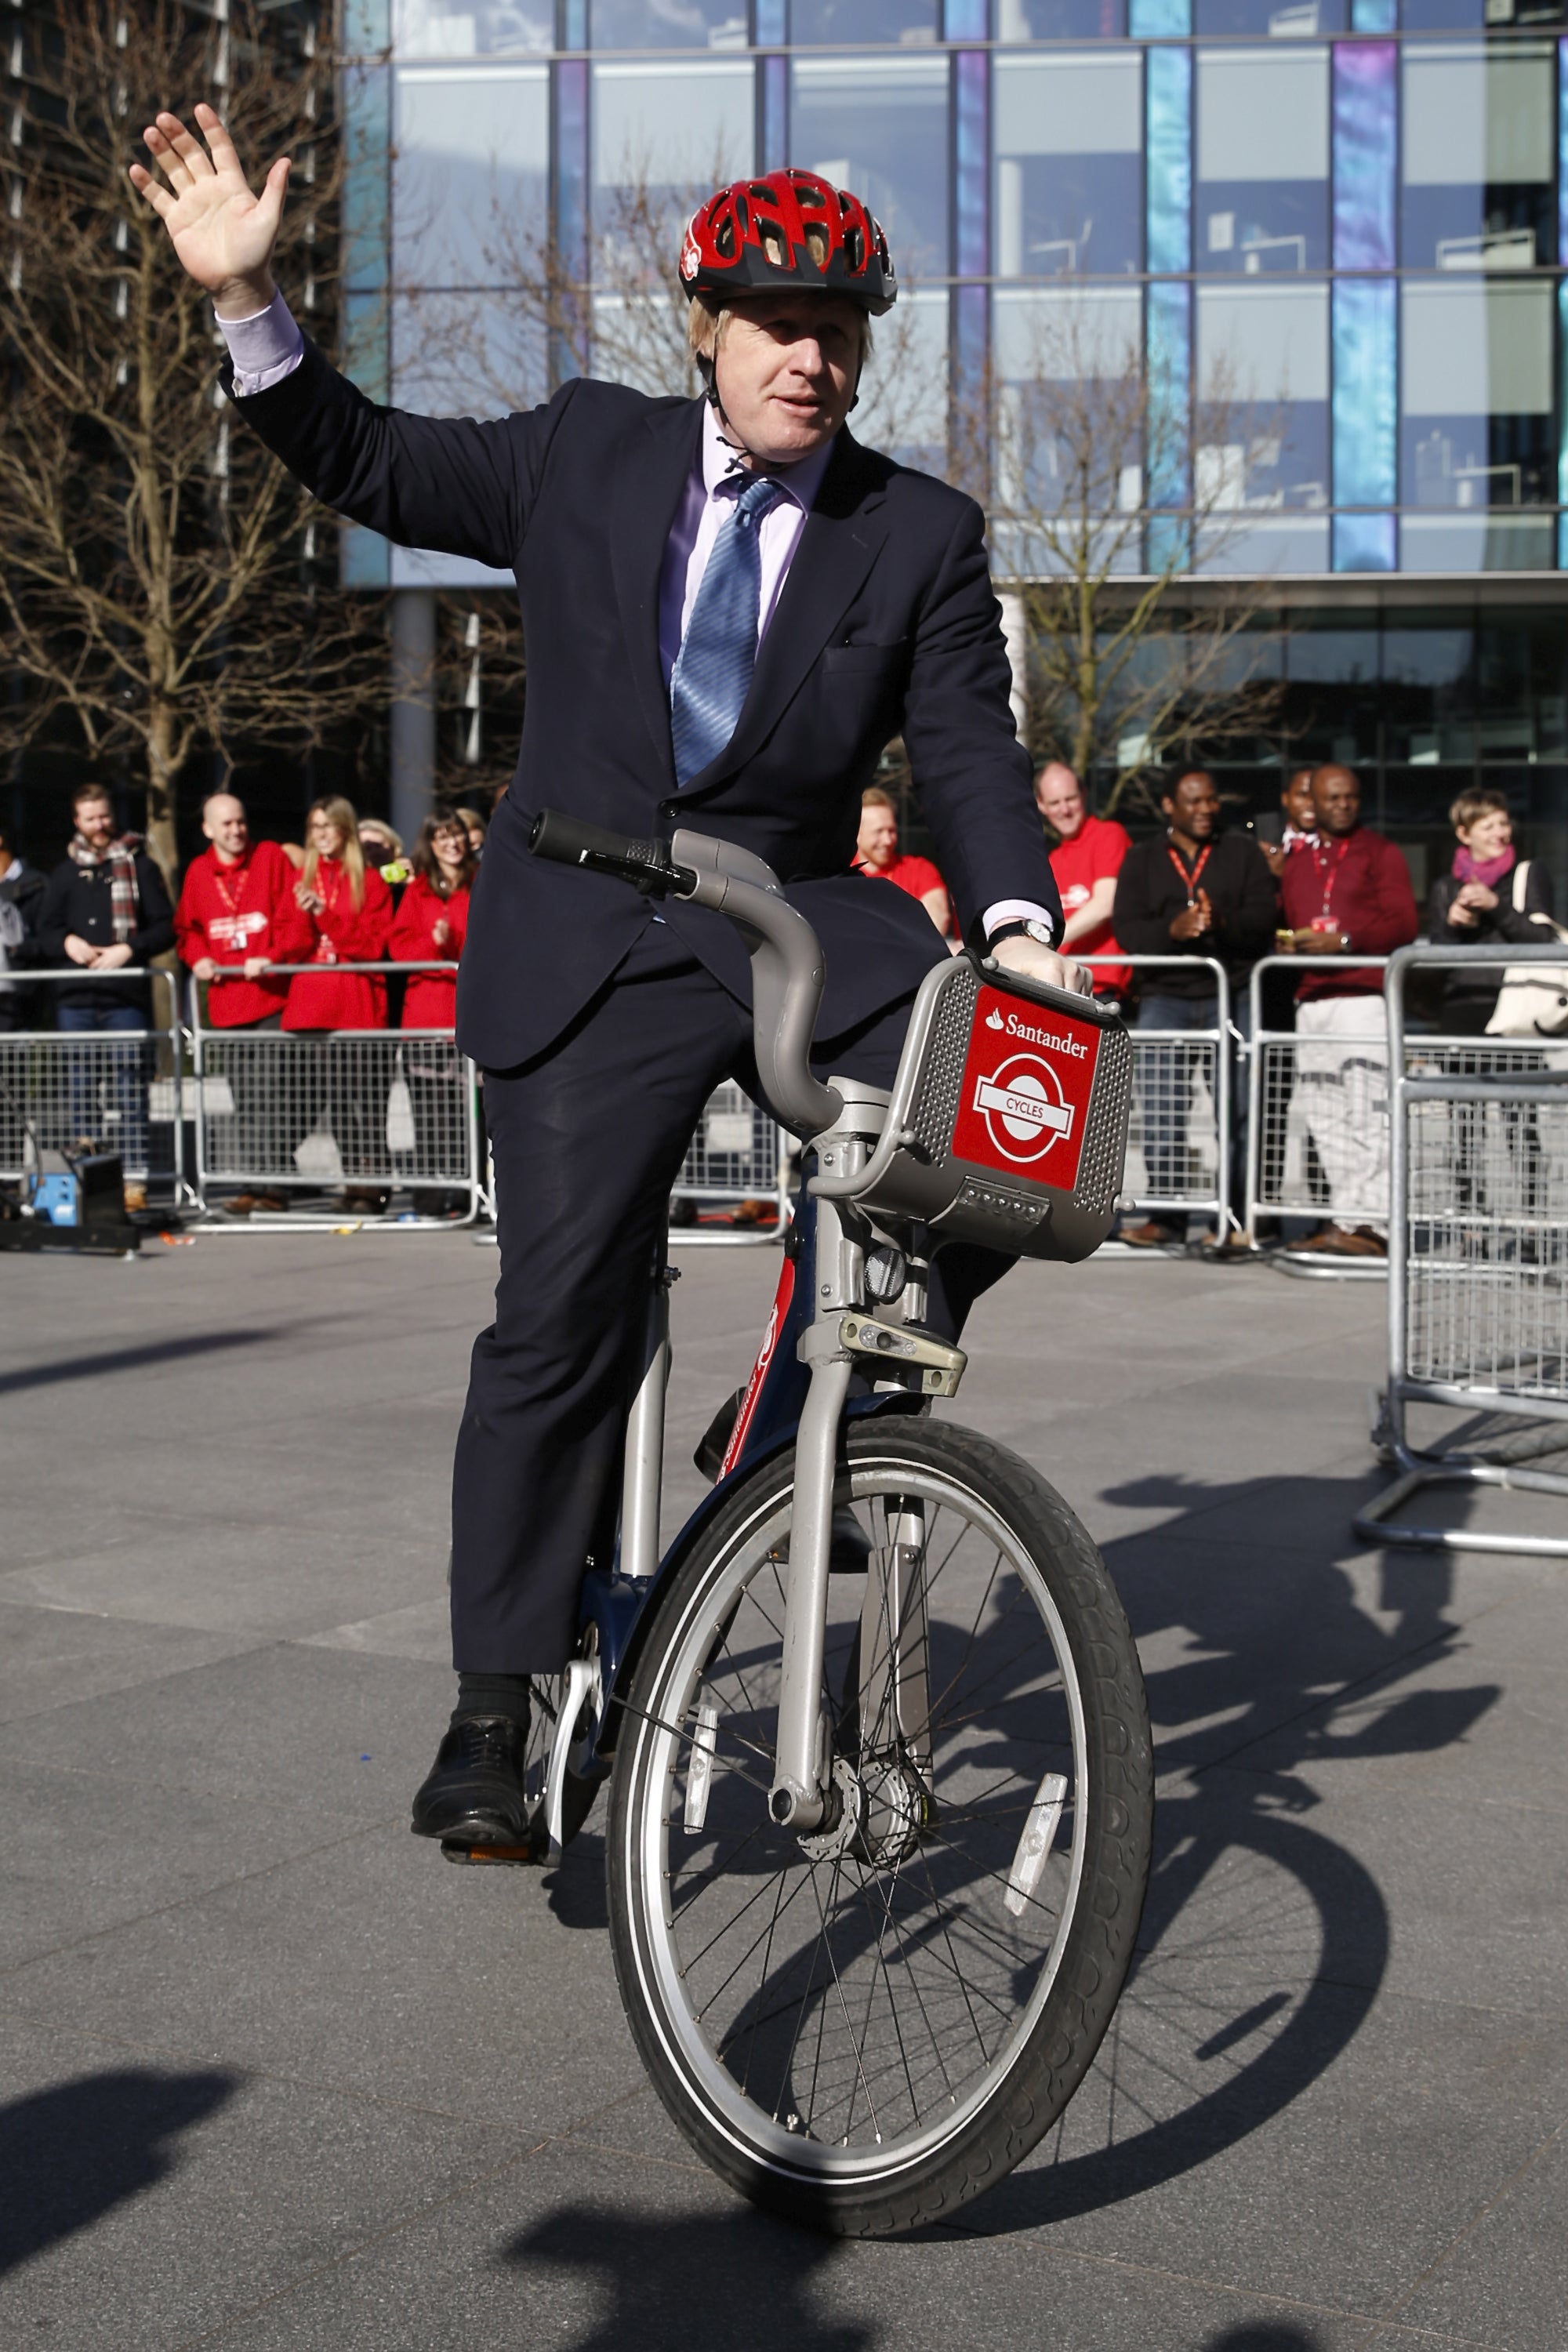 The then mayor of London rides around on a ‘Boris bike’ in 2015